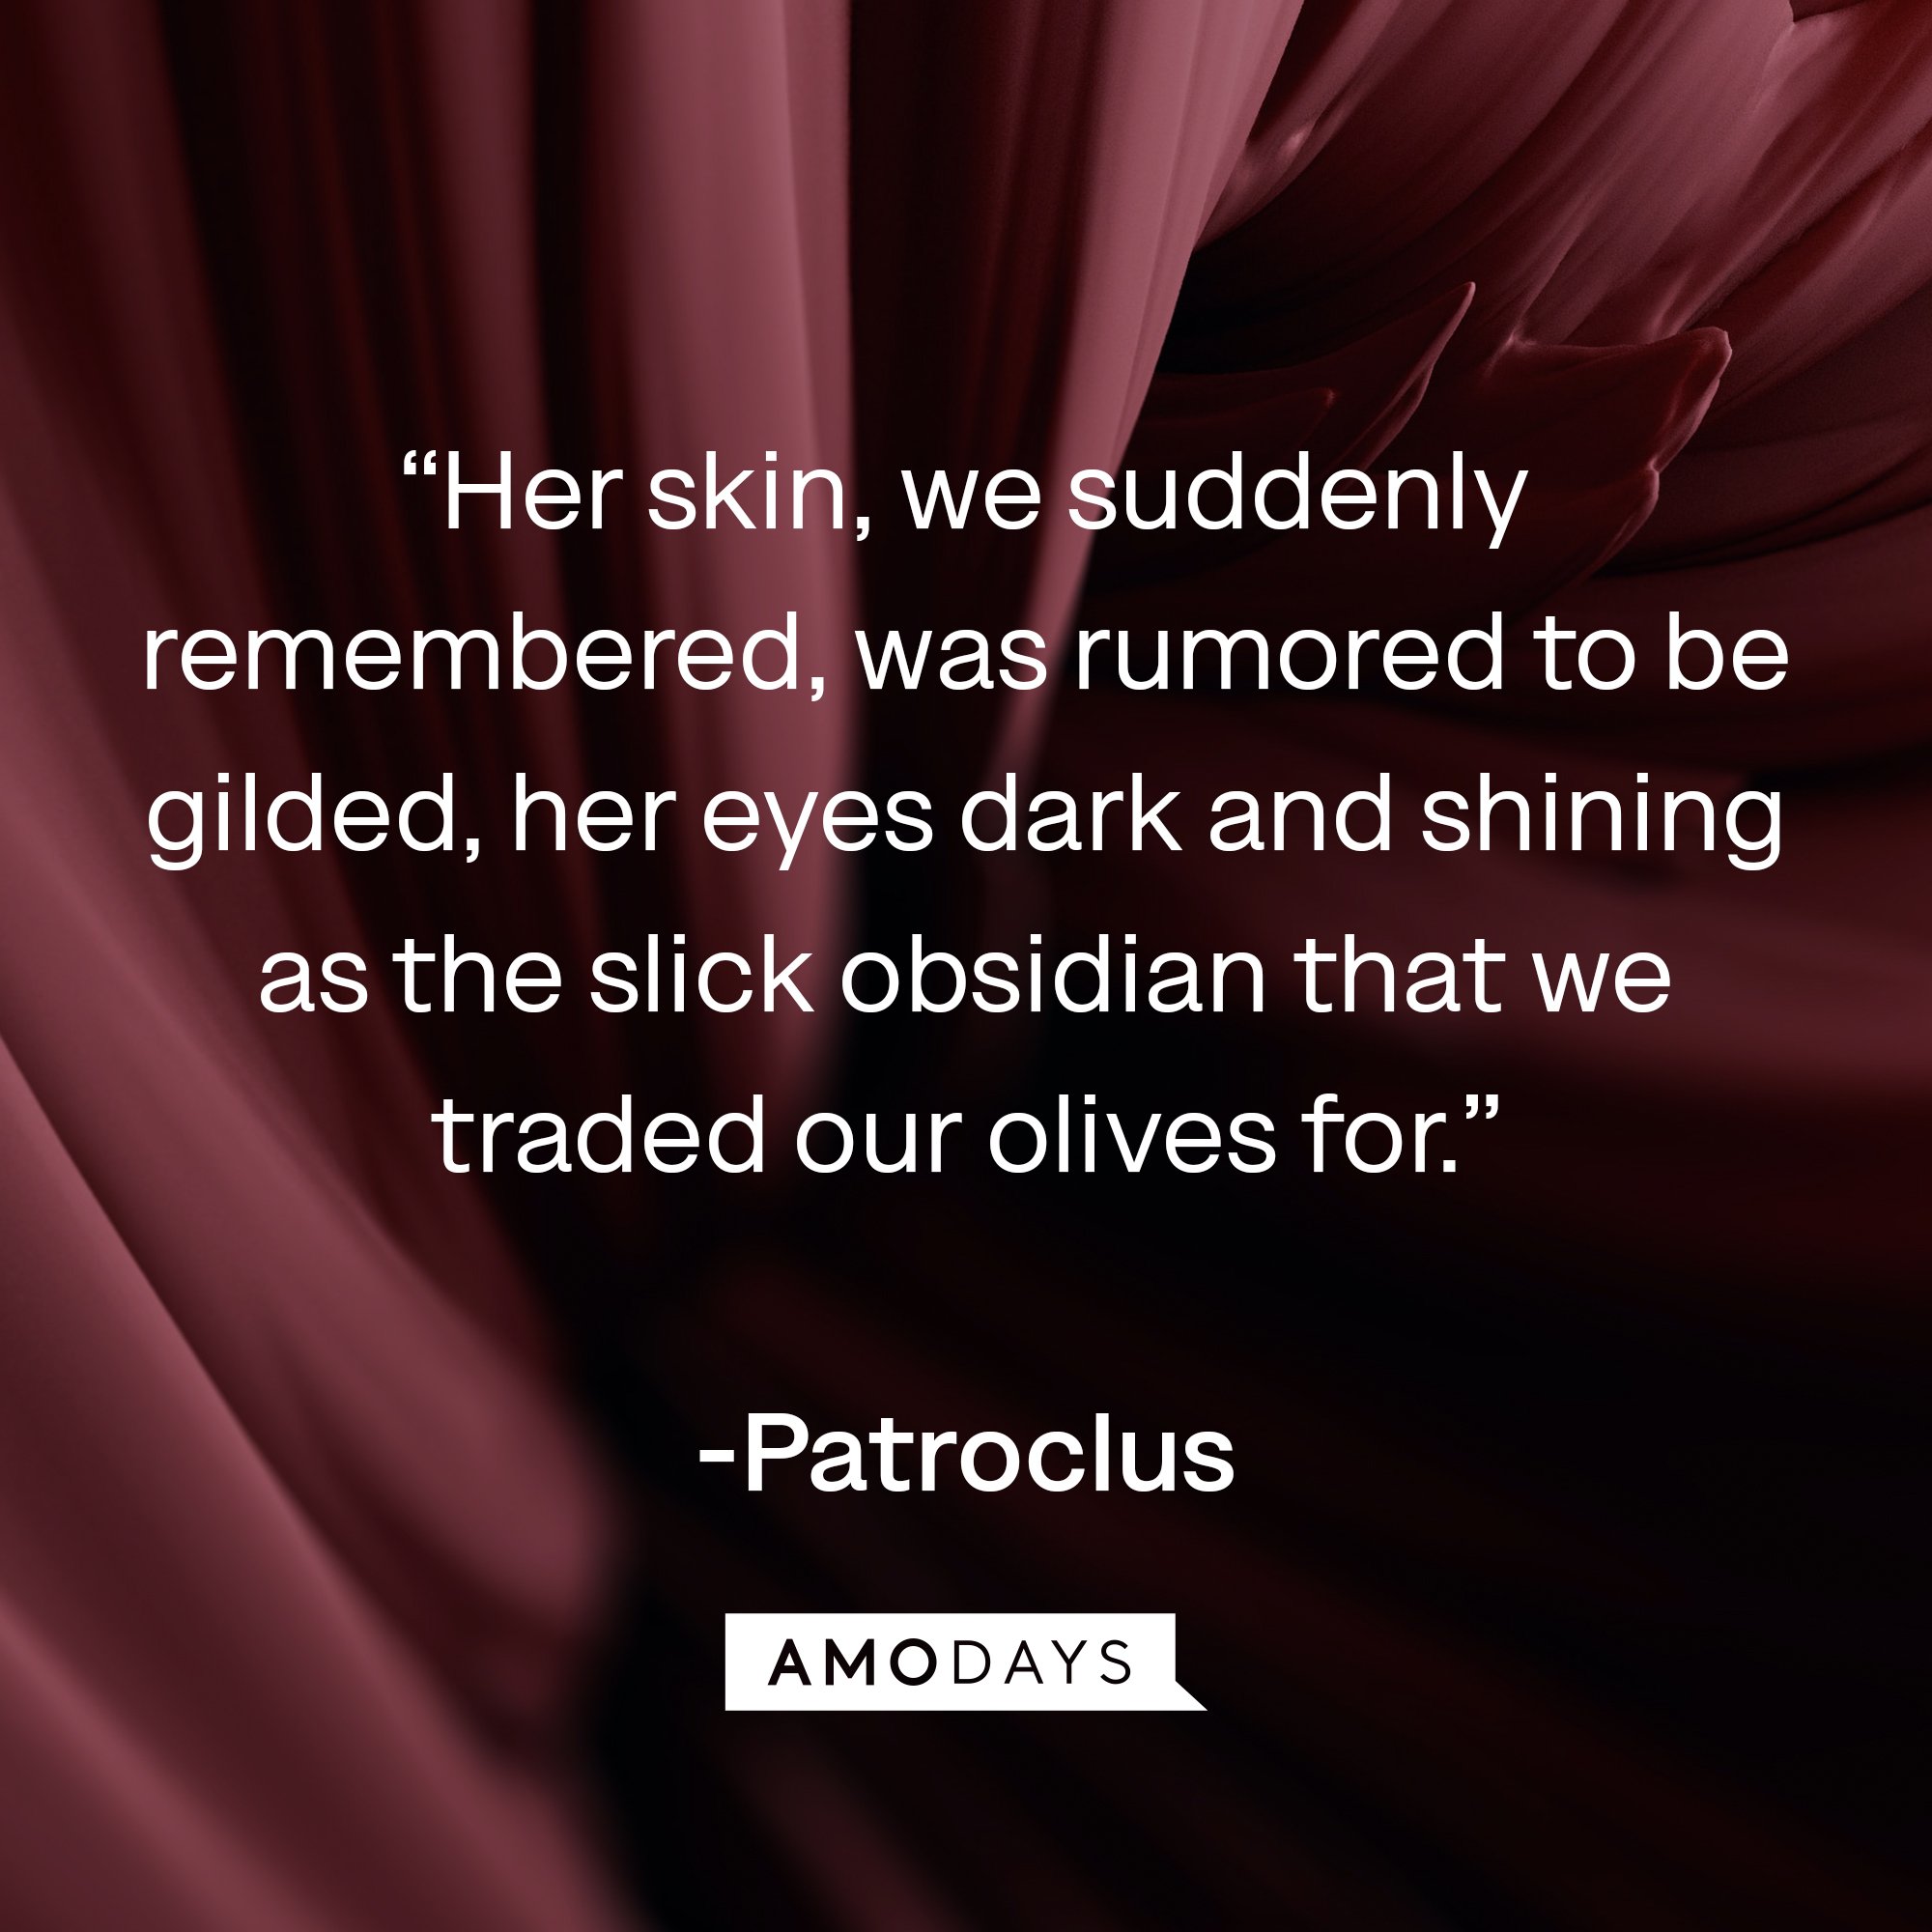  Patroclus's quote: “Her skin, we suddenly remembered, was rumored to be gilded, her eyes dark and shining as the slick obsidian that we traded our olives for.” | Image: AmoDays